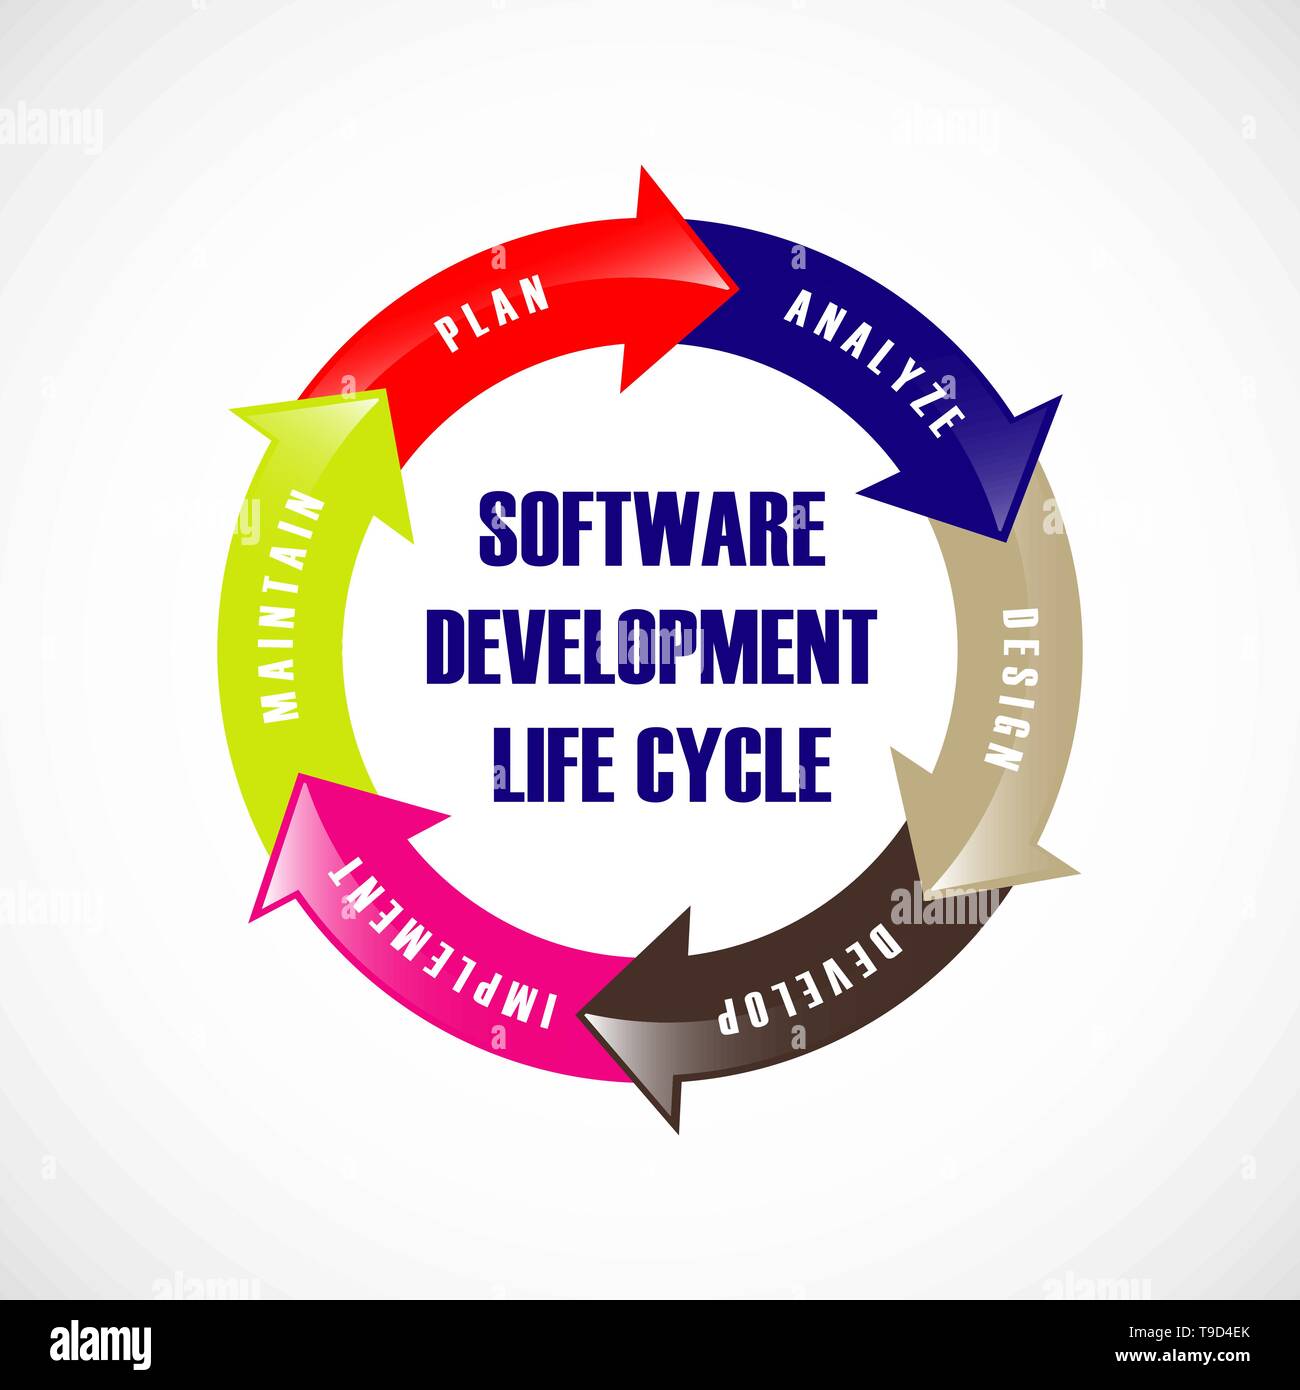 Software Development Life Cycle. Vector illustrates software applications in different phases. Stock Vector